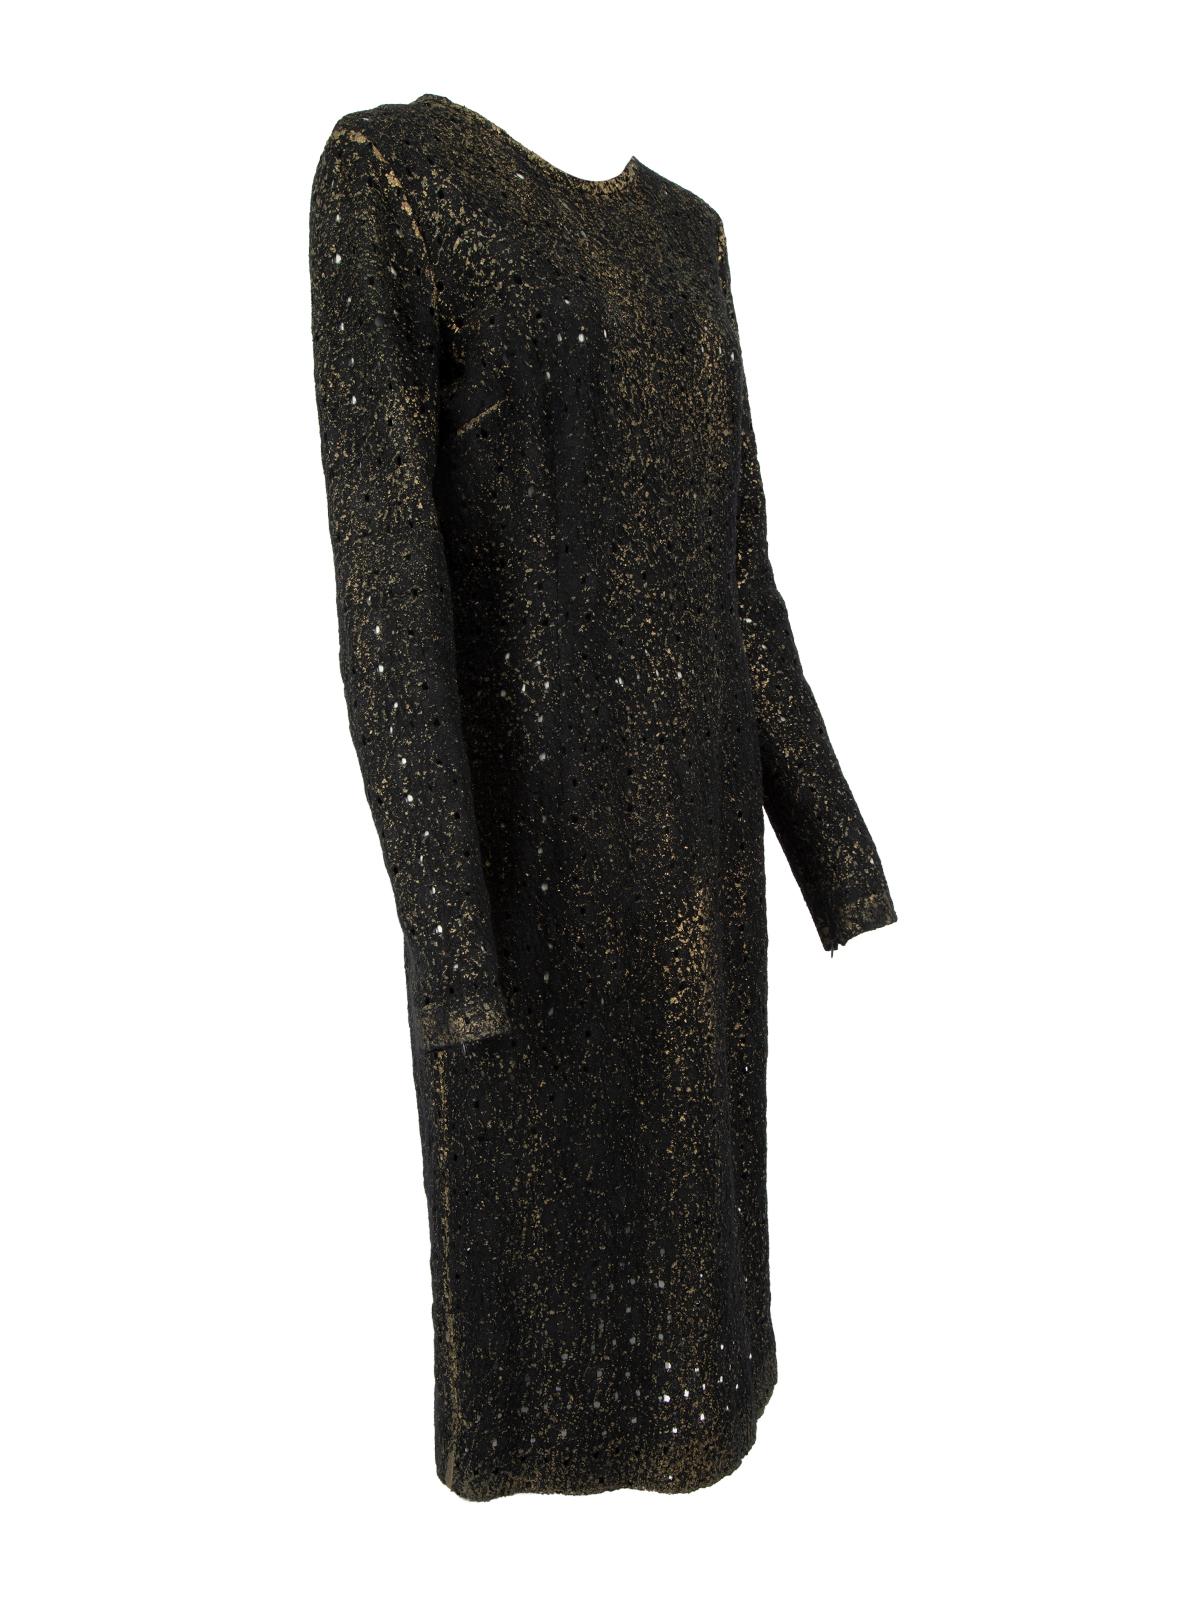 CONDITION is Very good. Hardly any visible wear to dress is evident on this used Bottega Veneta designer resale item. Details Black and gold Viscose Midi dress Perforated design Long sleeves Zip detail on cuffs Round neckline Back zip fastening